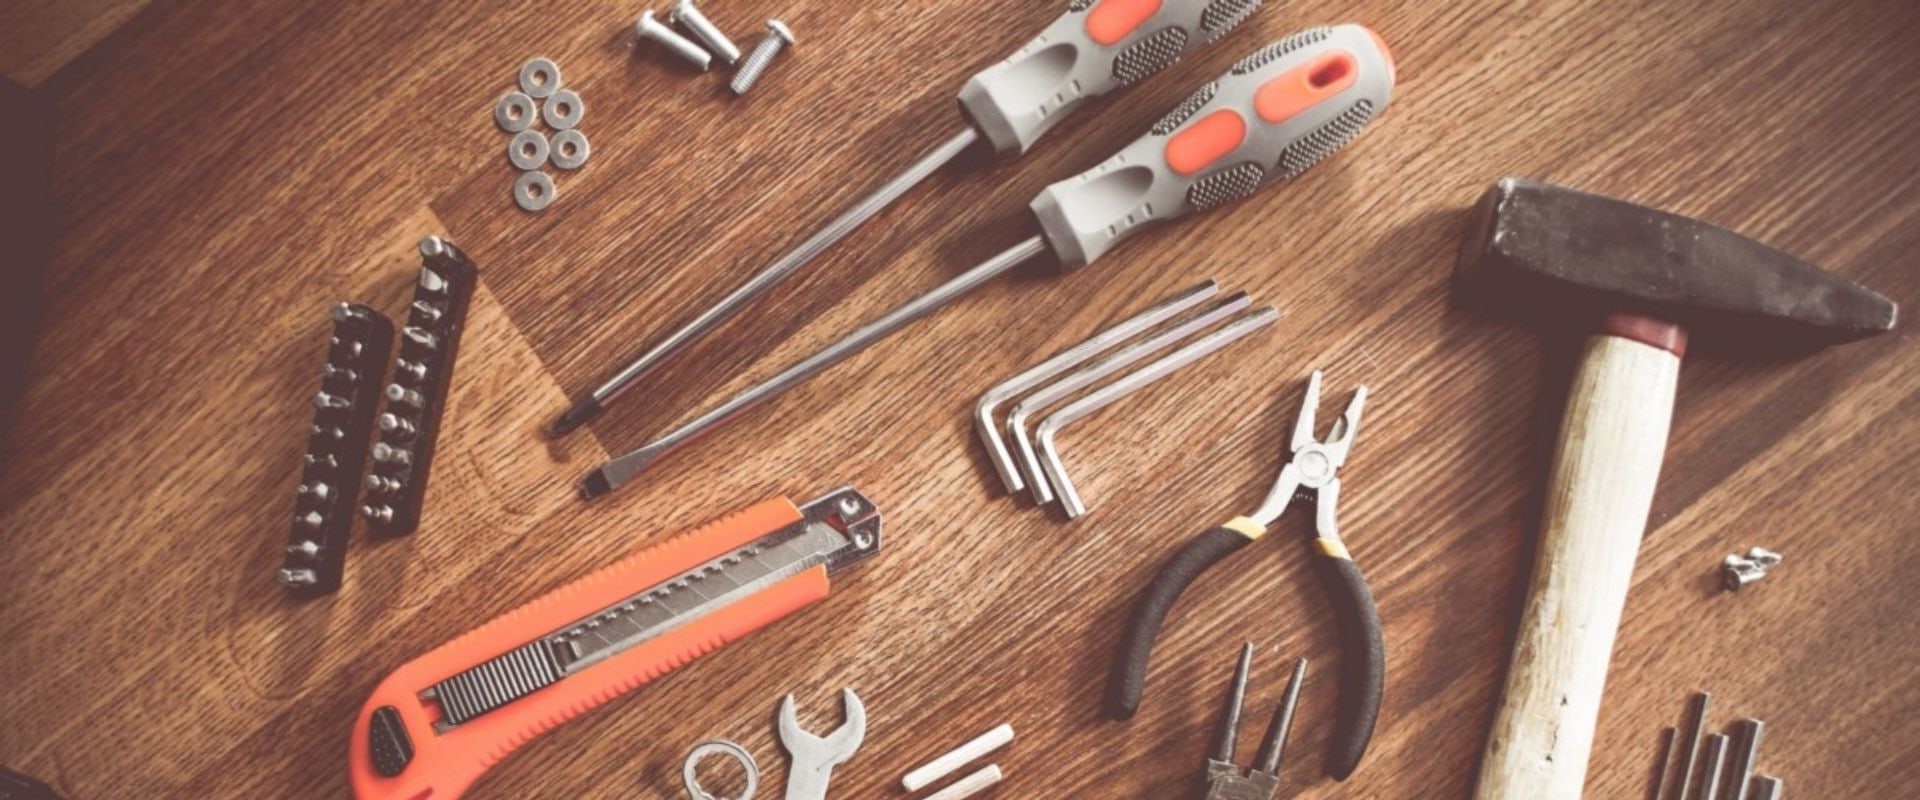 What is the importance of hand tools in doing electrical works?